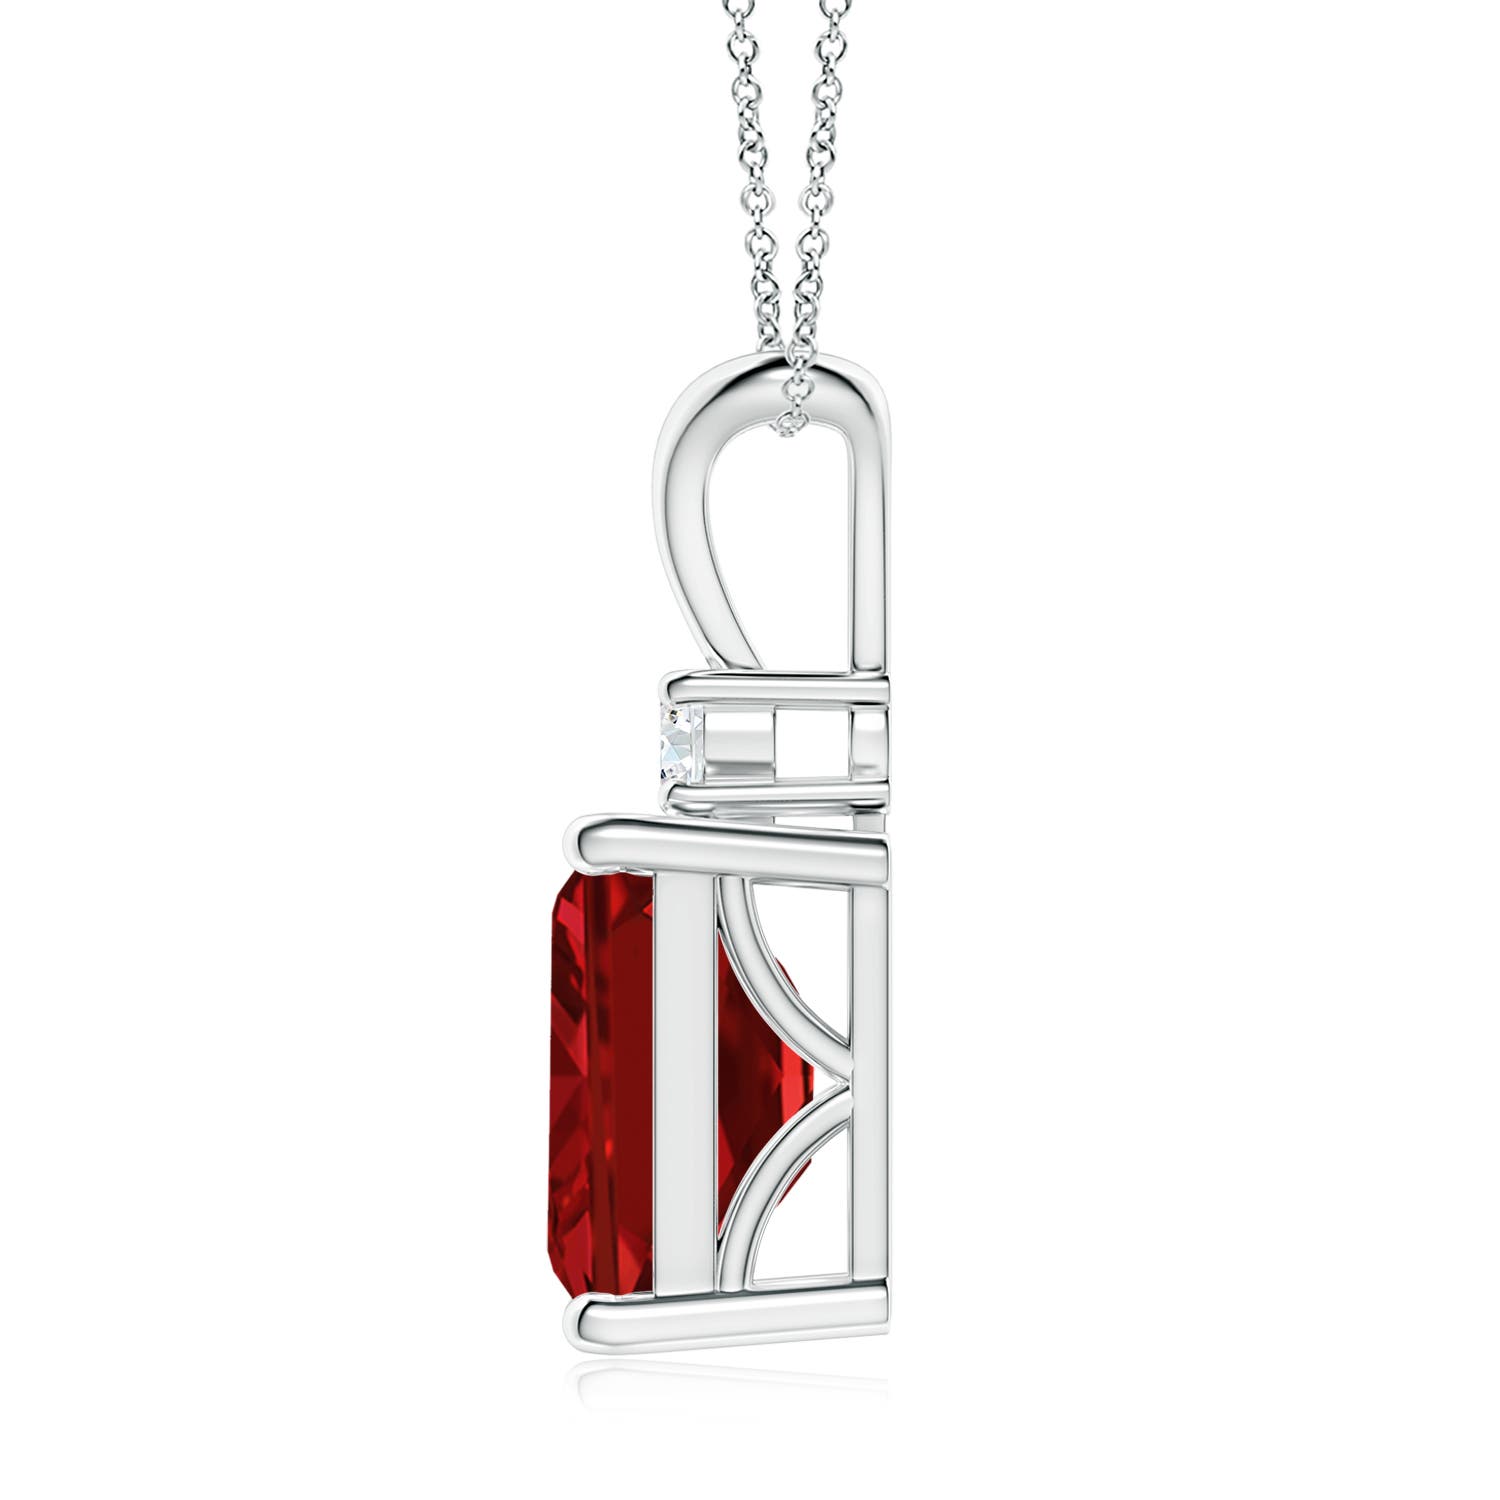 AAAA - Ruby / 4.11 CT / 14 KT White Gold